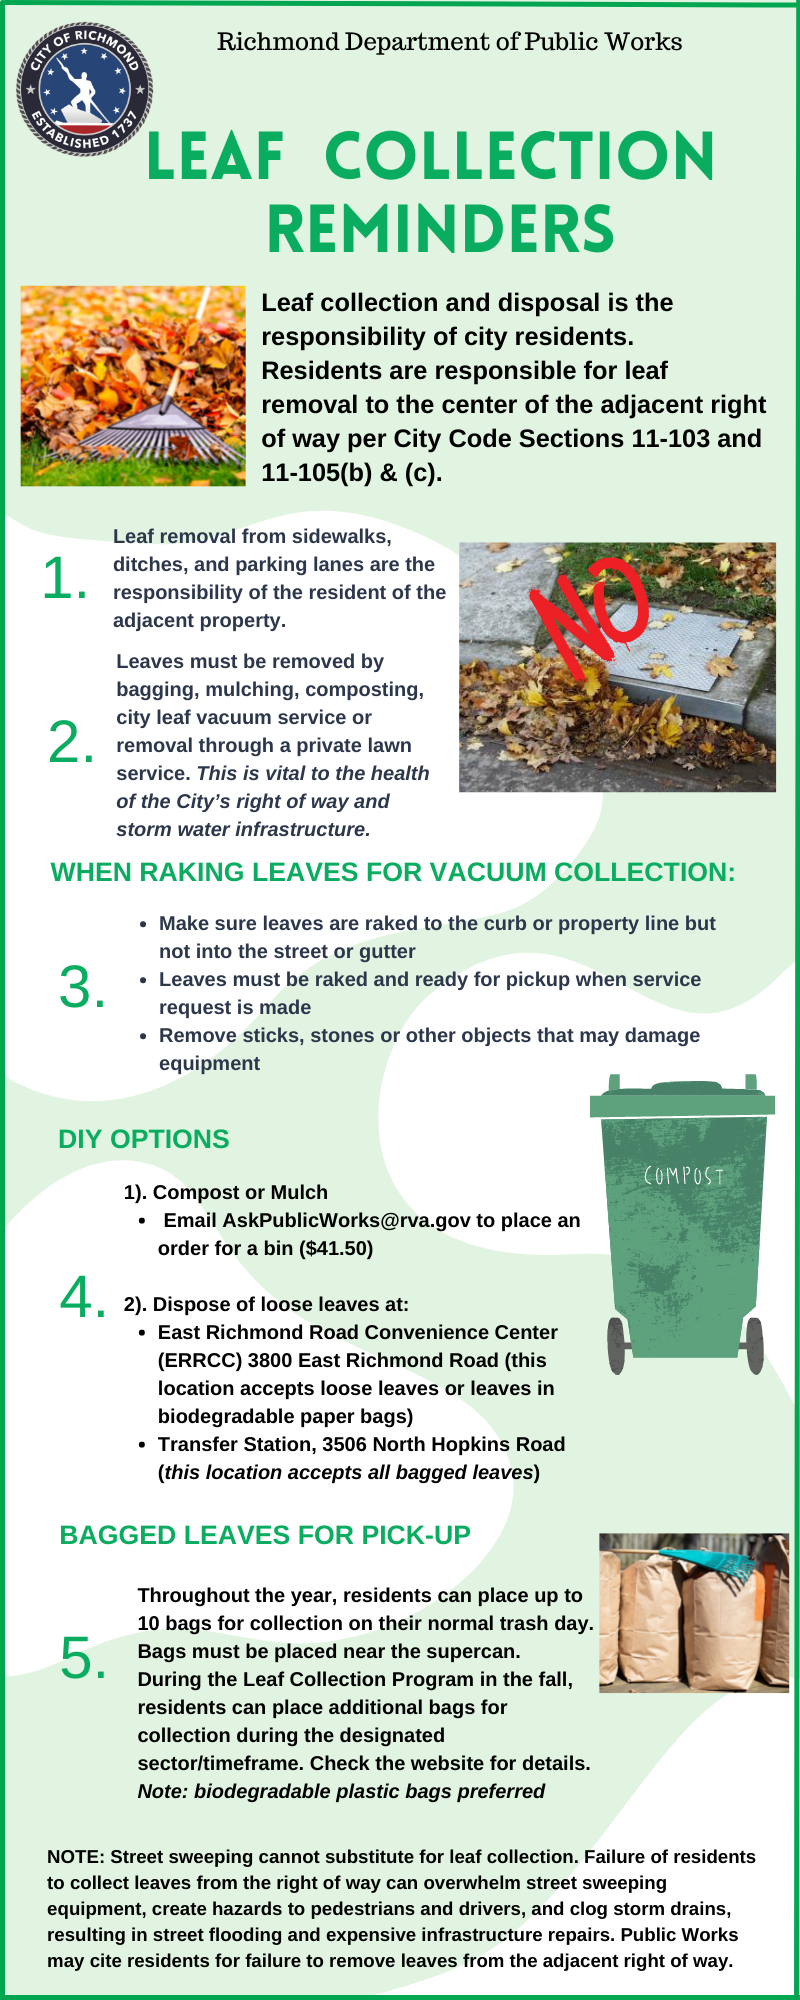 Image - Leaf collection and disposal is the responsibility of city residents. 